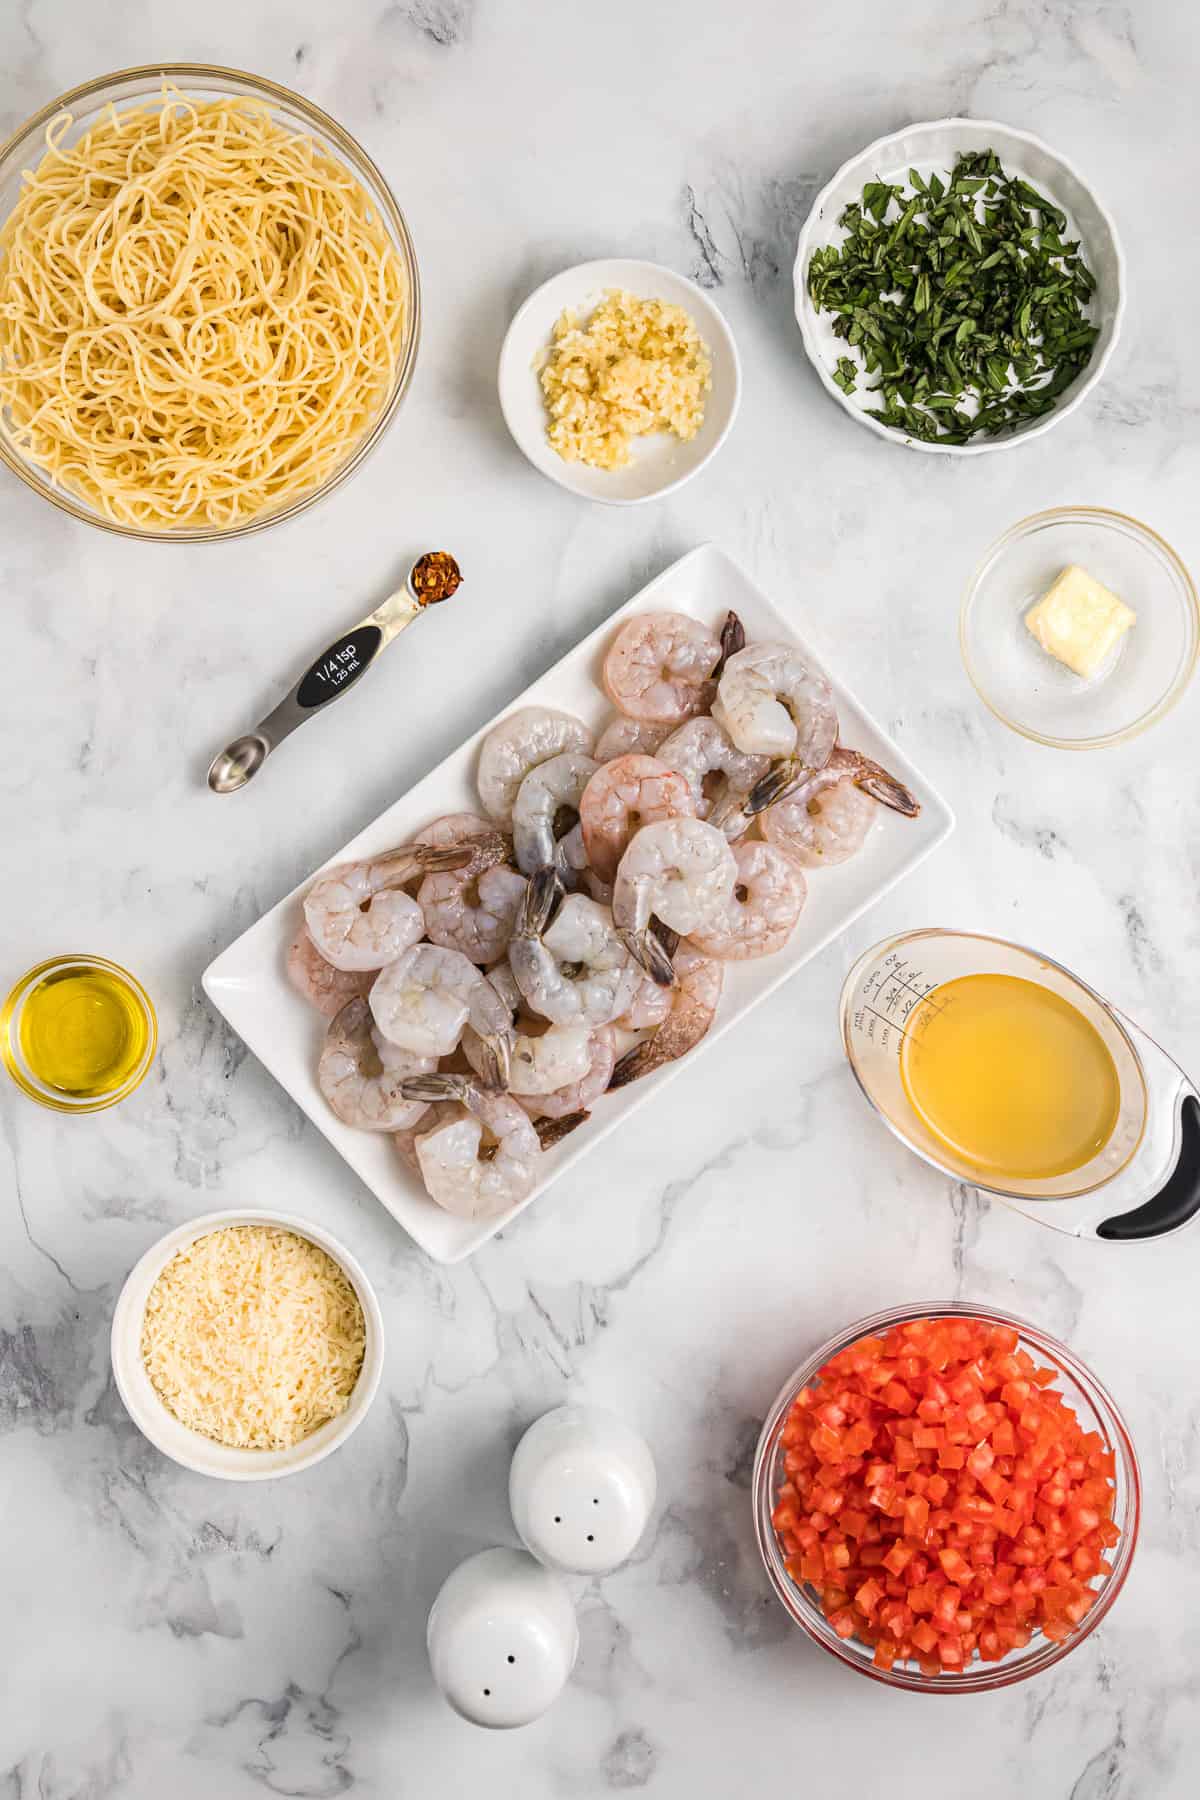 Ingredients for angel hair pasta with shrimp and pomodoro sauce.